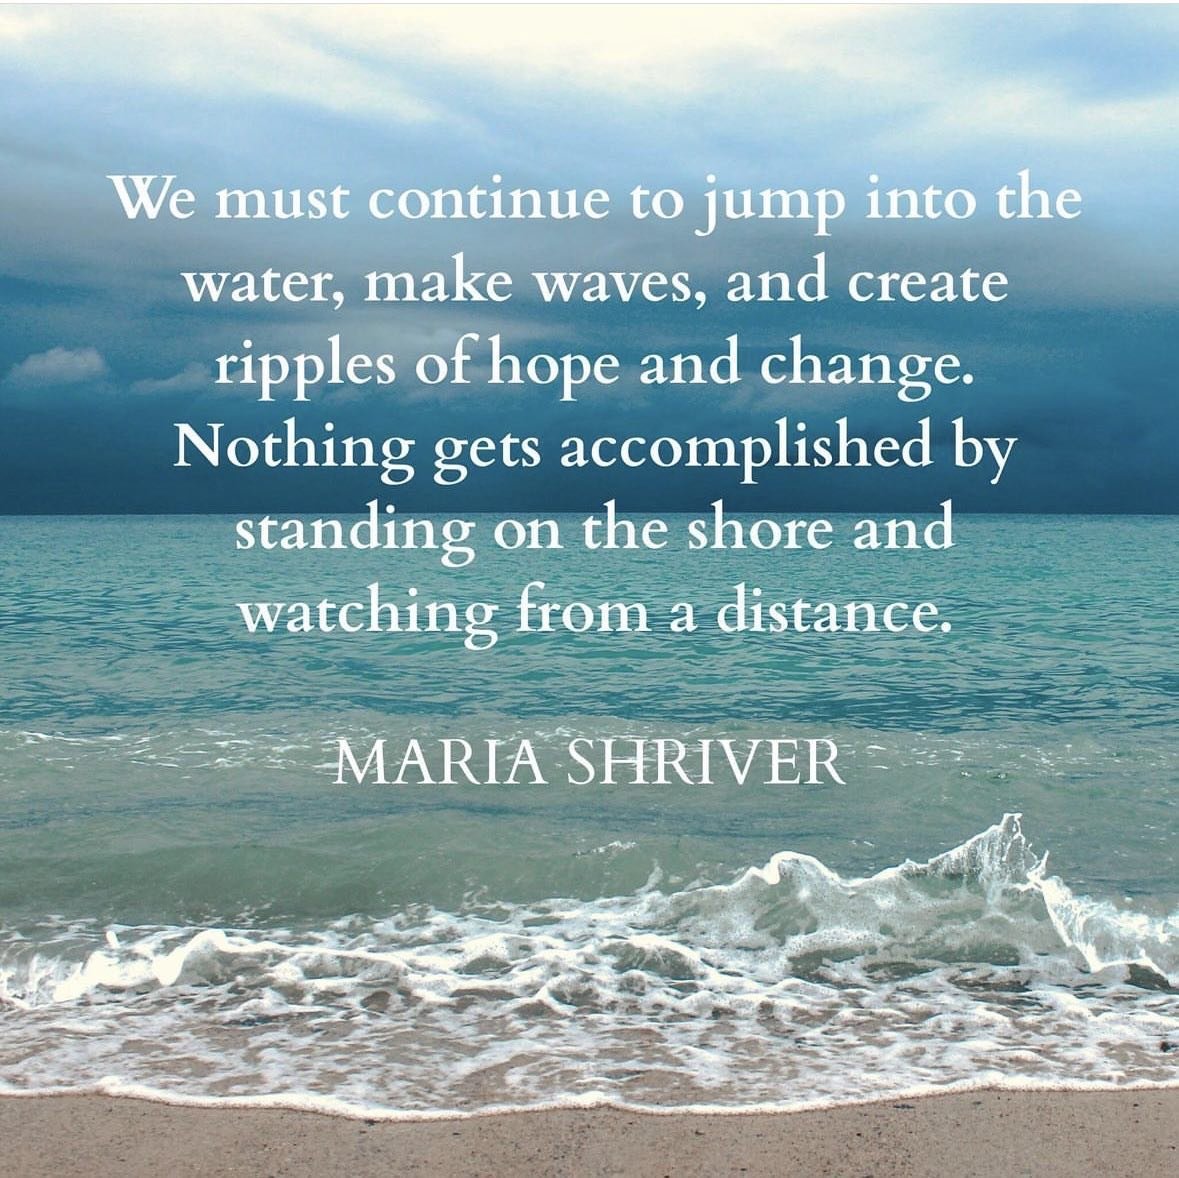 Love all @mariashriver shares. She&rsquo;s been an inspiration for me since I was a kid. And still is. The news is flooding our feeds with atrocities, angst, and so much it&rsquo;s overwhelming. I haven&rsquo;t slept well in months. We need to be inf